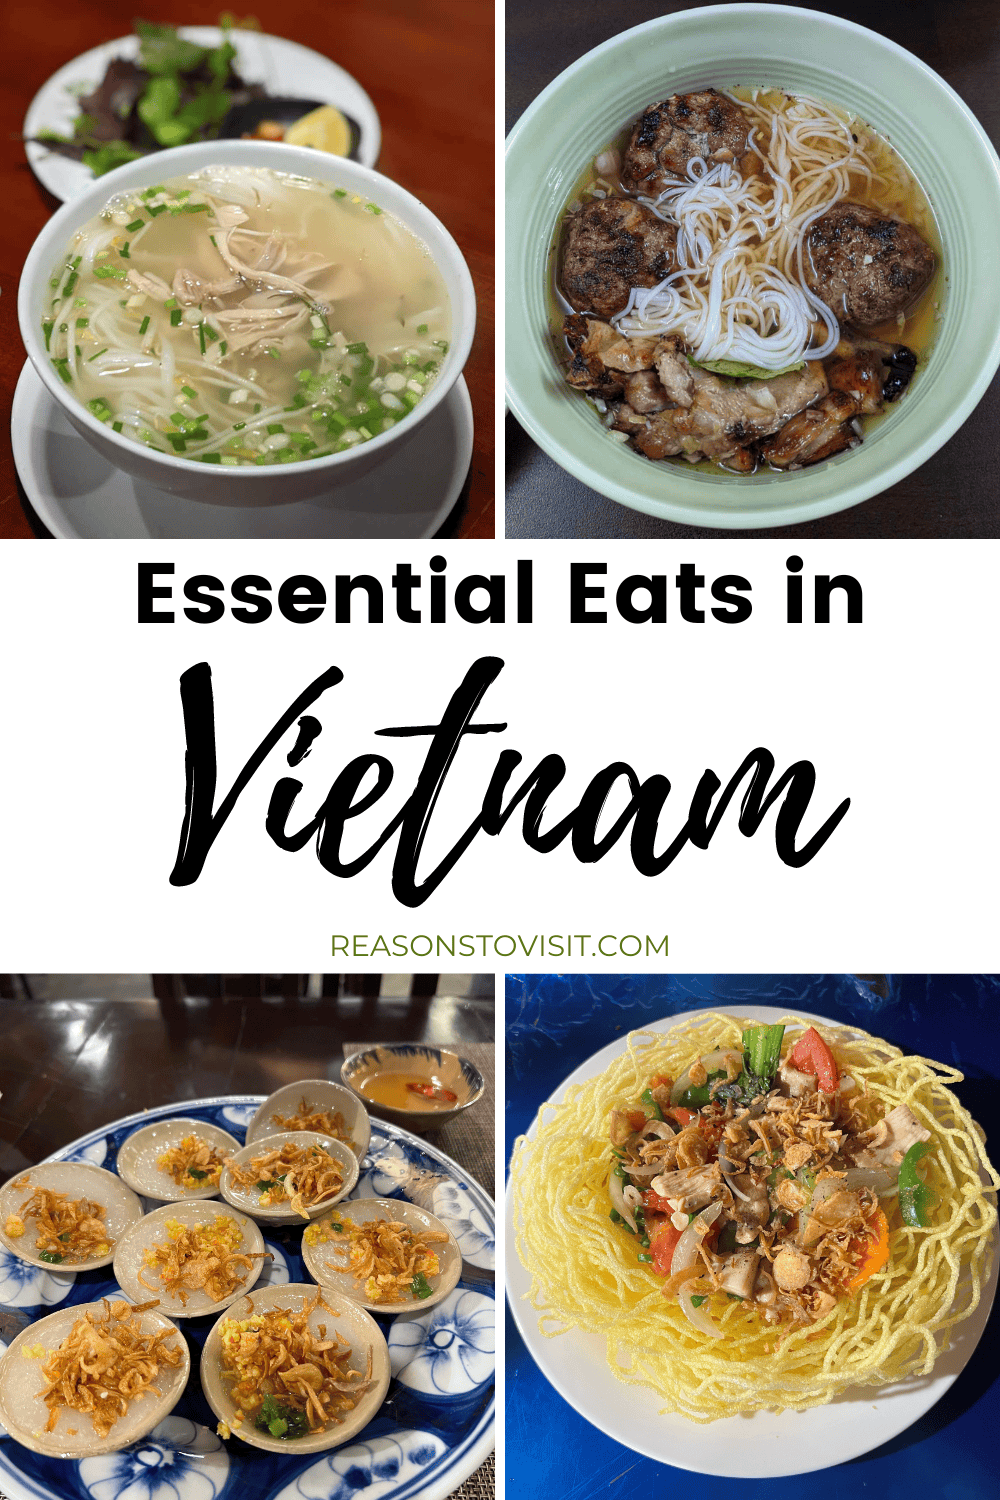 Discover the best dishes to eat in Vietnam! From the iconic Pho and Banh Mi to the delicious Bun Cha and fresh spring rolls, this guide covers the must-try Vietnamese foods that will tantalize your taste buds. Perfect for foodies planning a trip to Vietnam